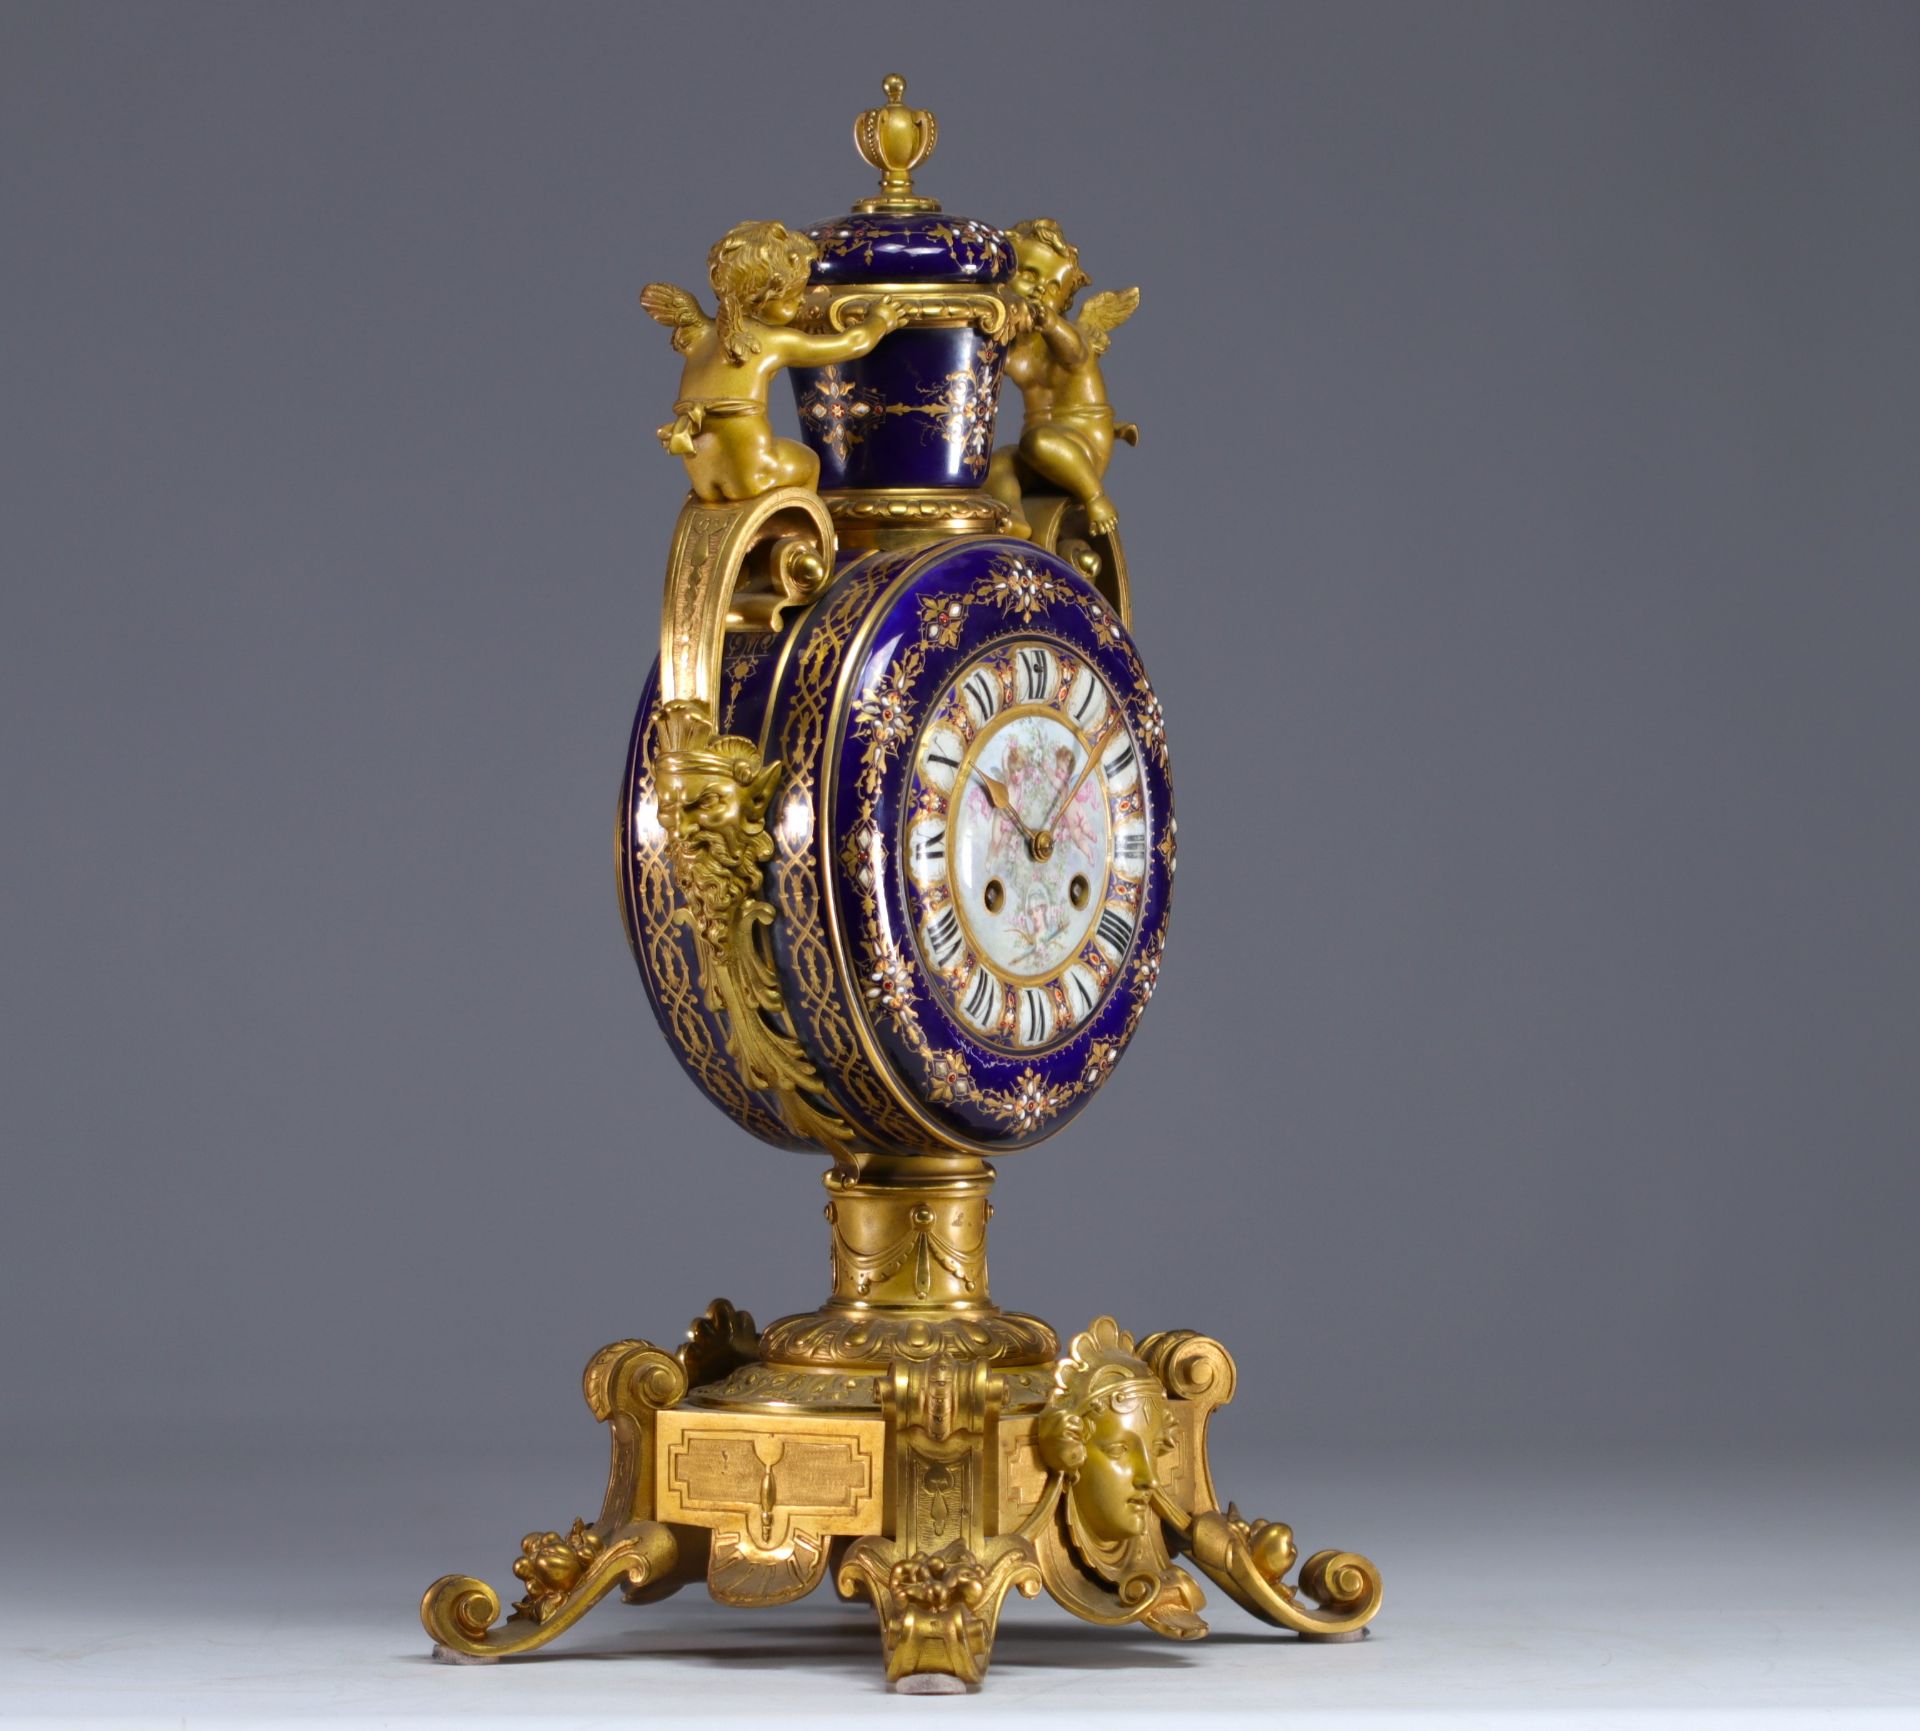 A rare Sevres porcelain and gilt bronze clock decorated with cherubs. - Image 3 of 8